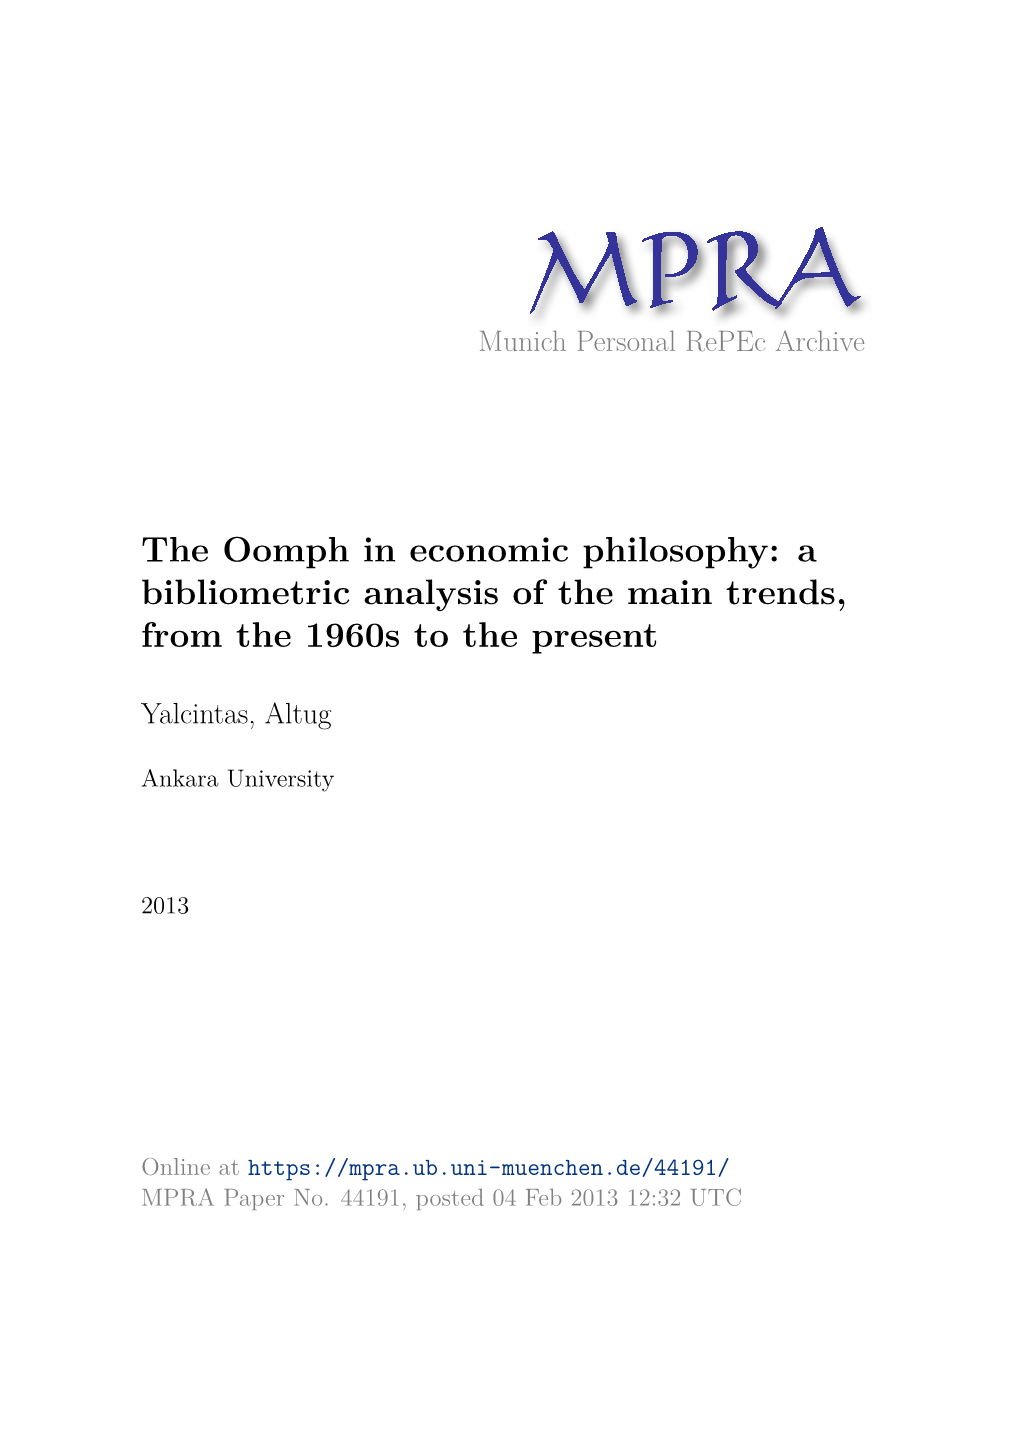 The Oomph in Economic Philosophy: a Bibliometric Analysis of the Main Trends, from the 1960S to the Present